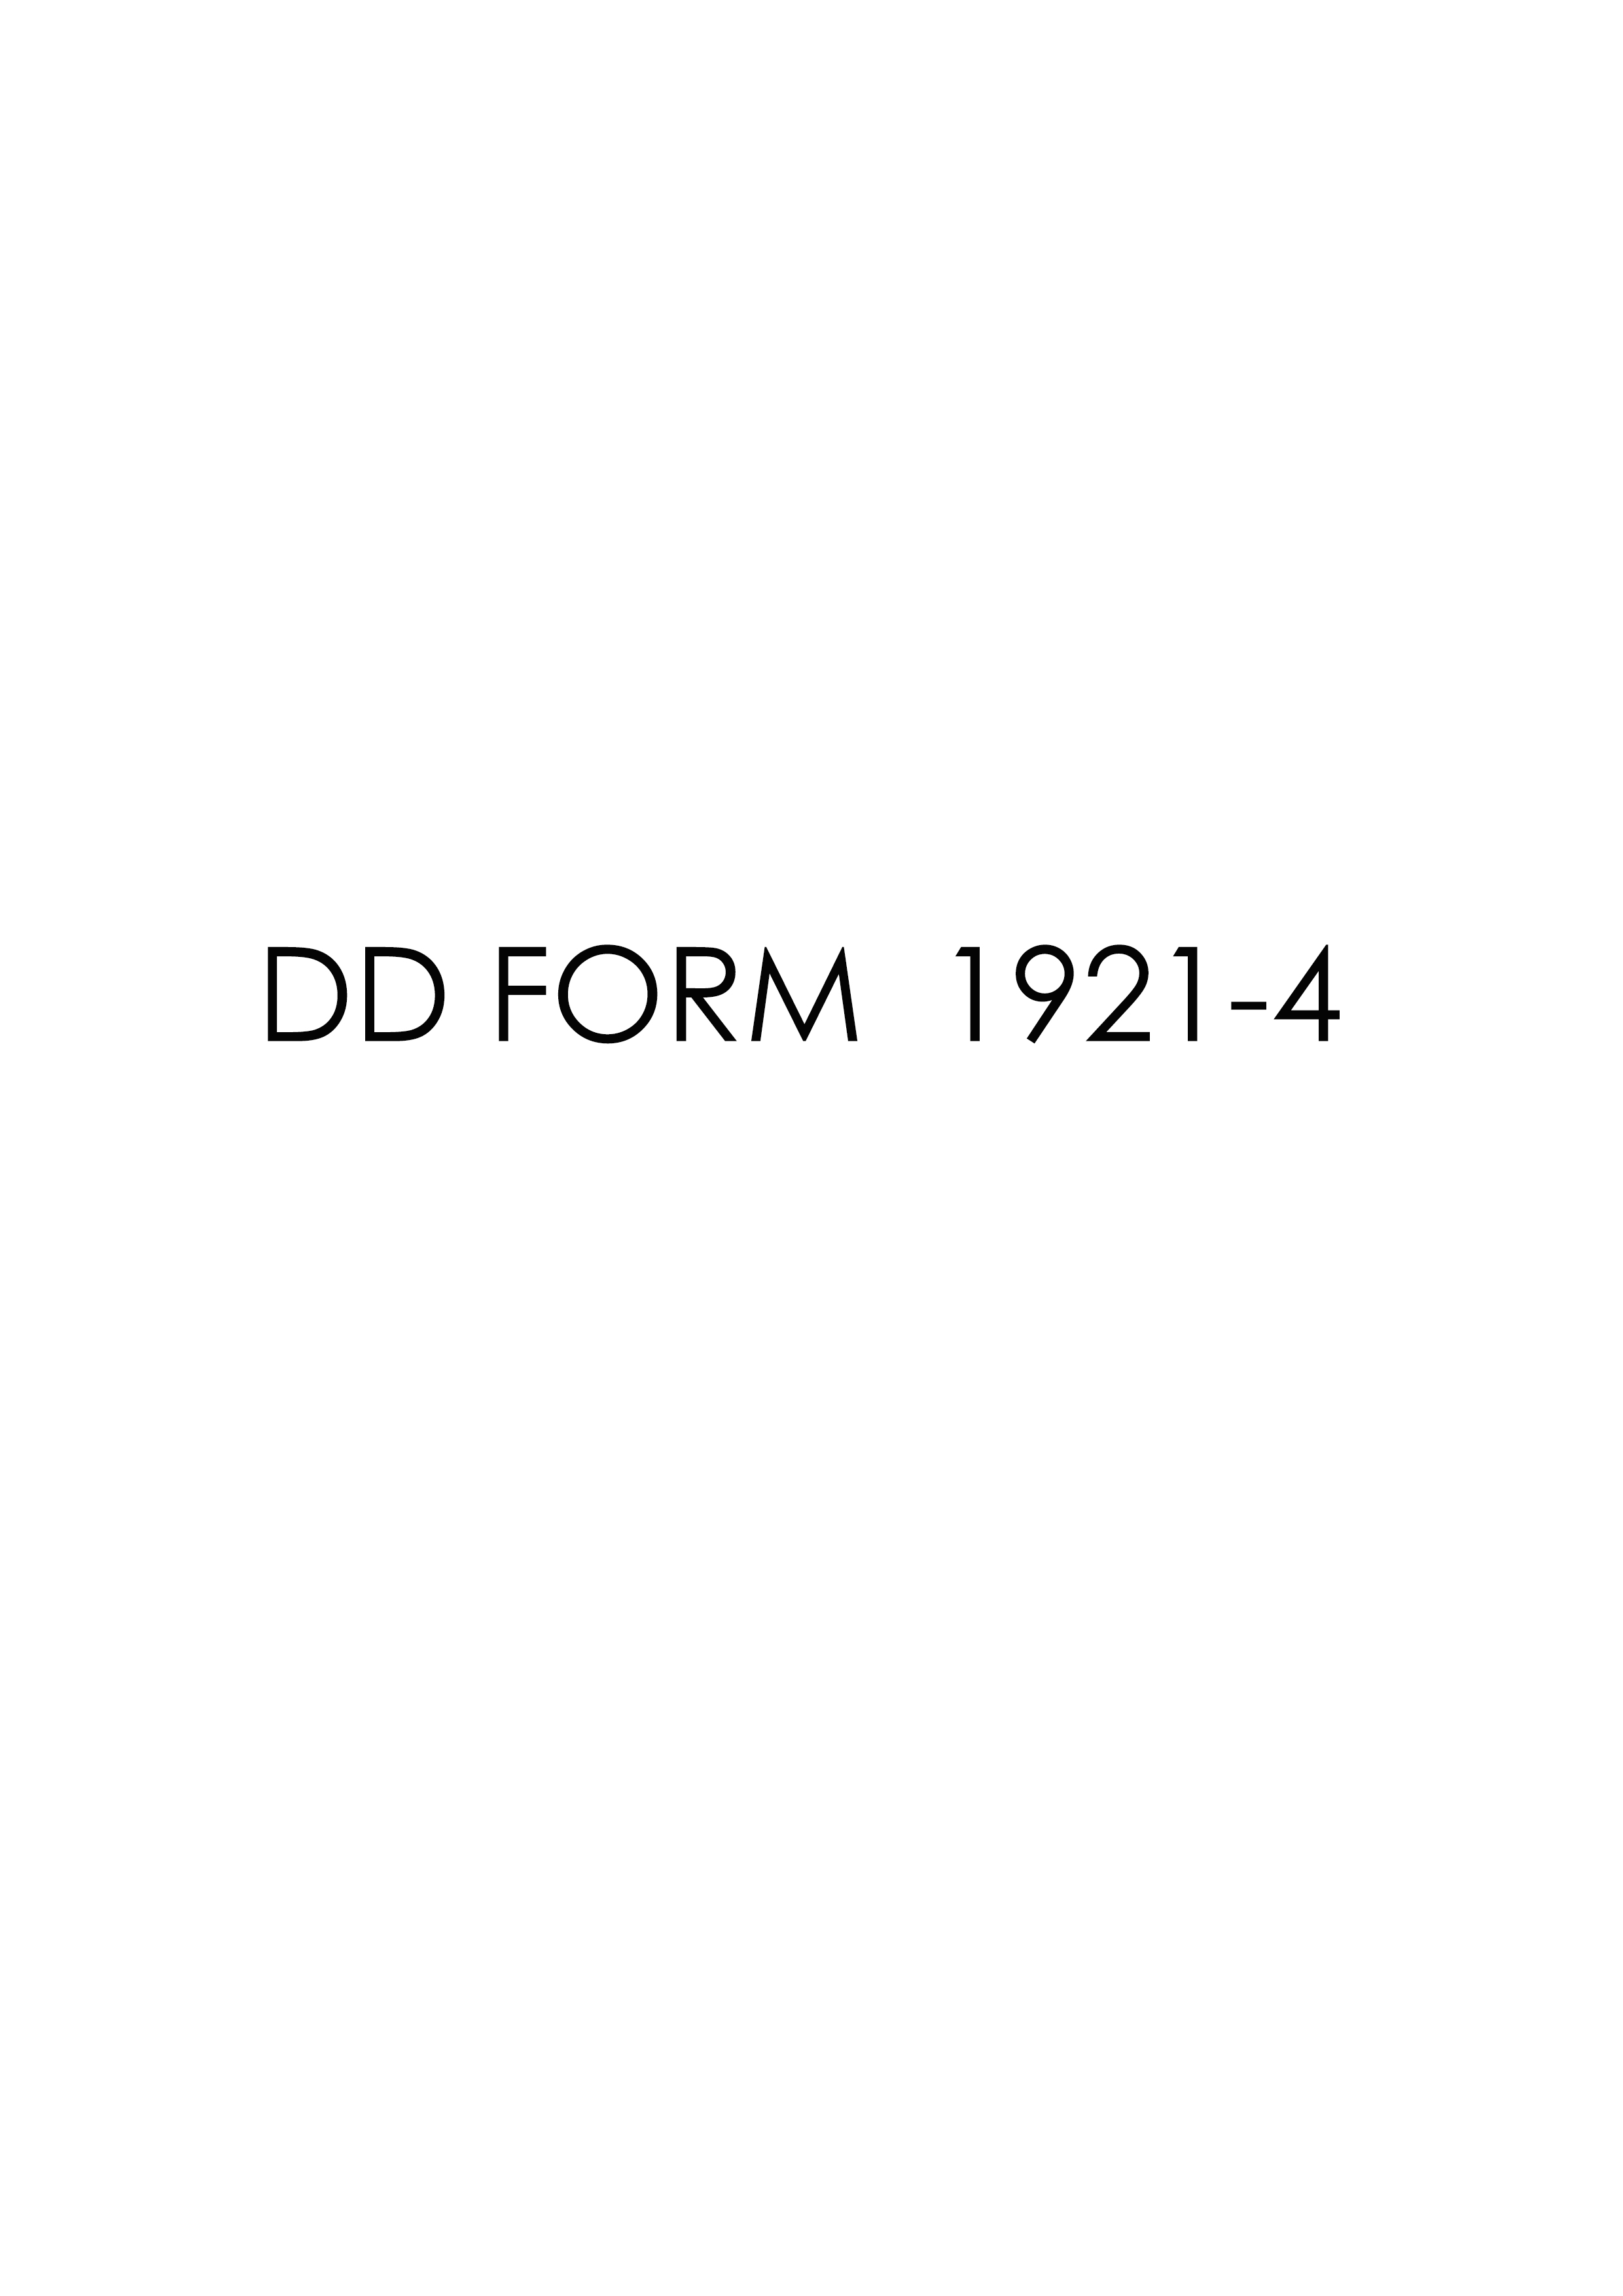 Download Fillable dd Form 1921-4